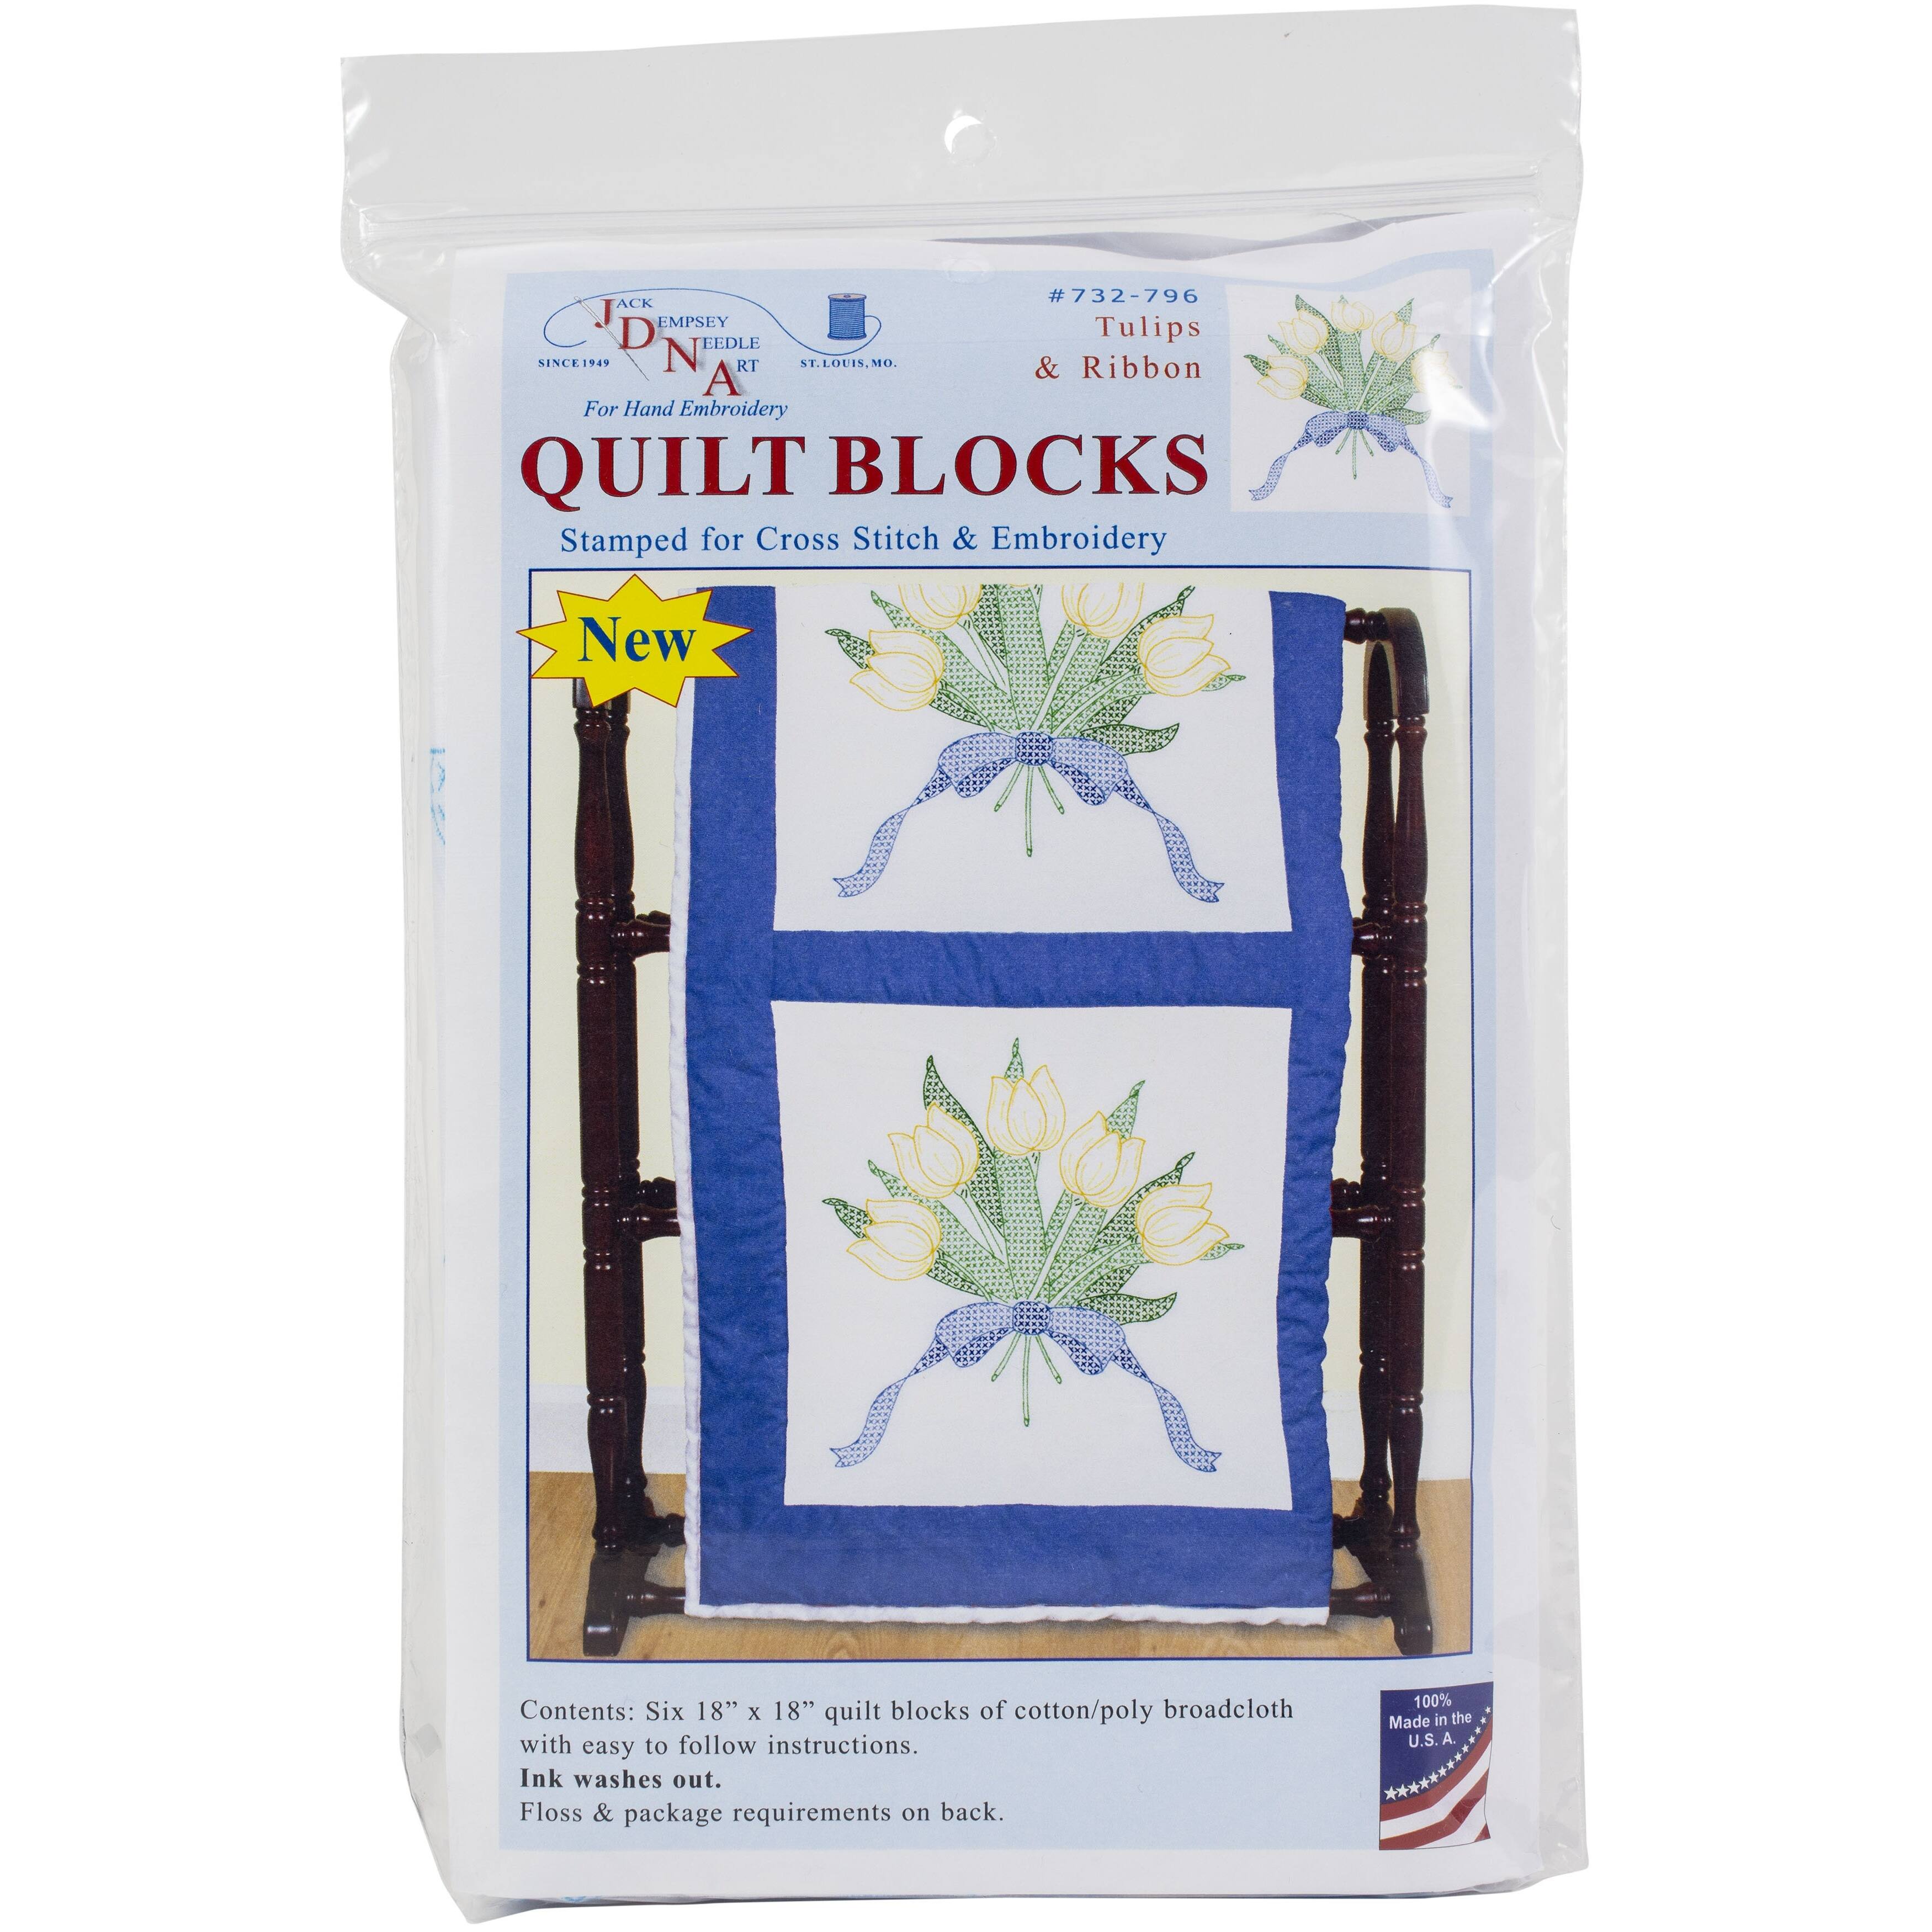 Jack　Ribbon　Tulips　Stamped　Dempsey　White　6ct.　Quilt　Blocks,　Michaels